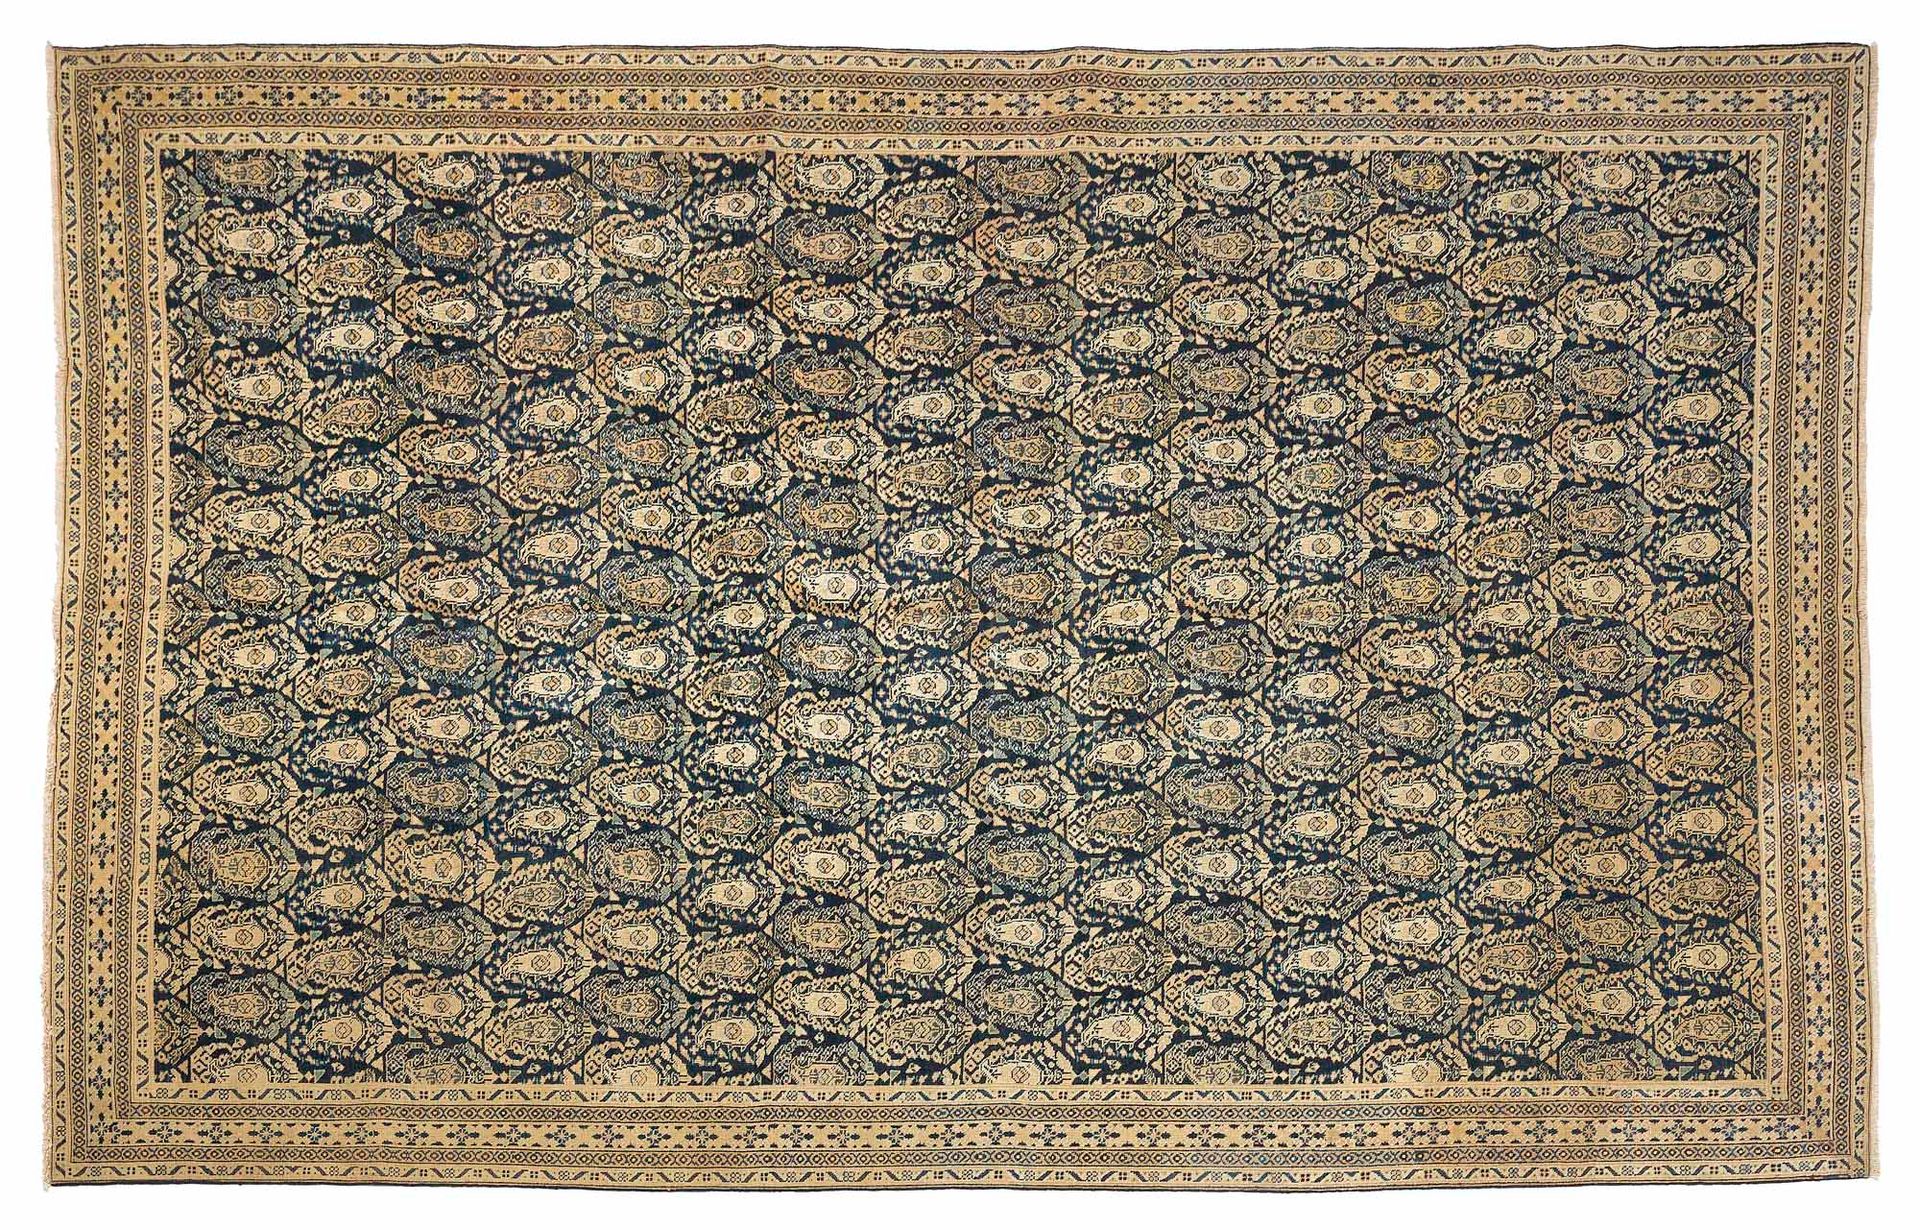 Null TABRIZ carpet (Persia), 1st third of the 20th century

Dimensions : 355 x 2&hellip;